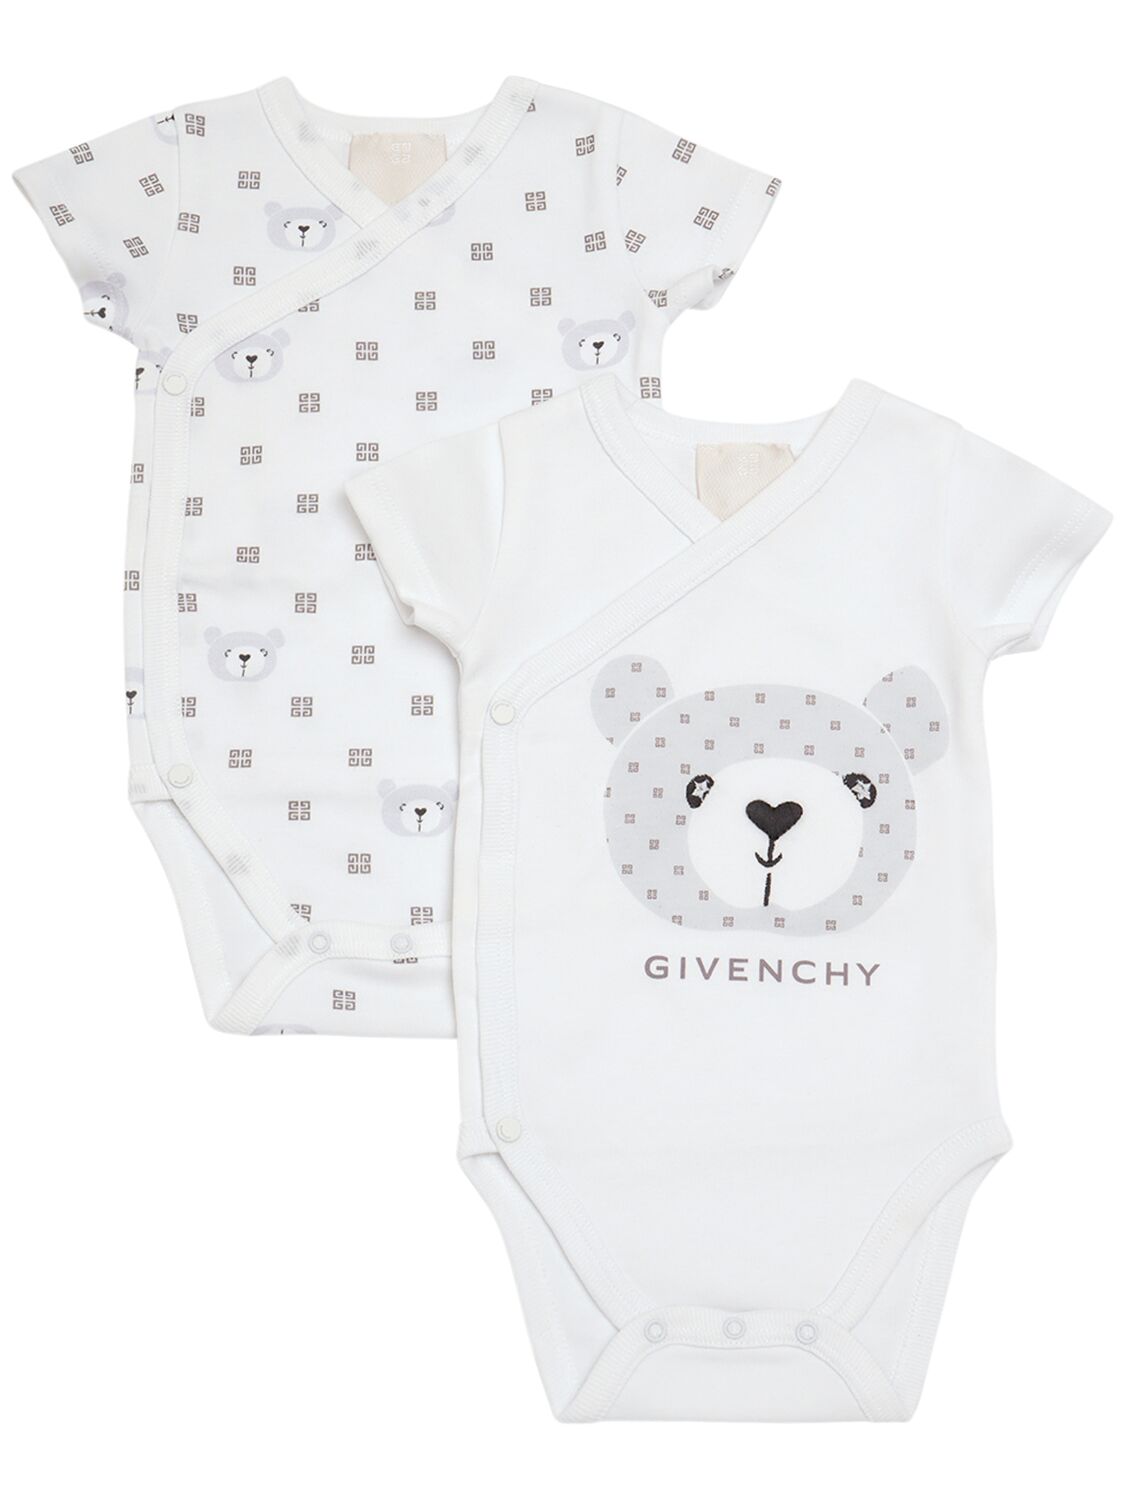 Givenchy Kids' Set Of 2 Cotton Jersey Bodysuits In White